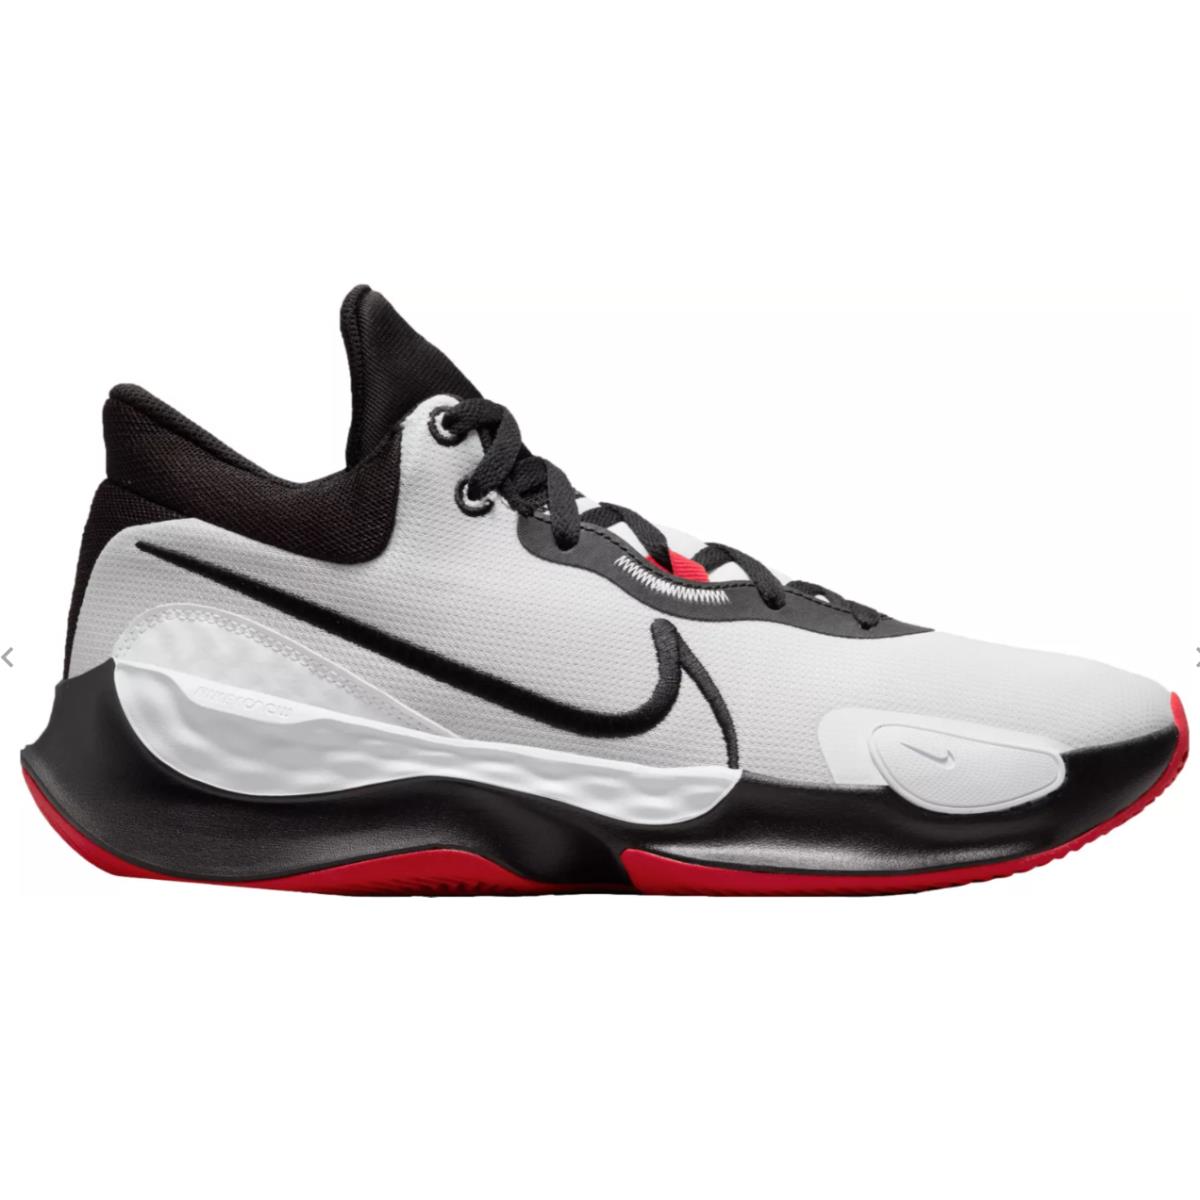 Nike Renew Elevate 3 Athletic Basketball Shoes Pure Platinum/gym Red DD9304 100 - Multiple